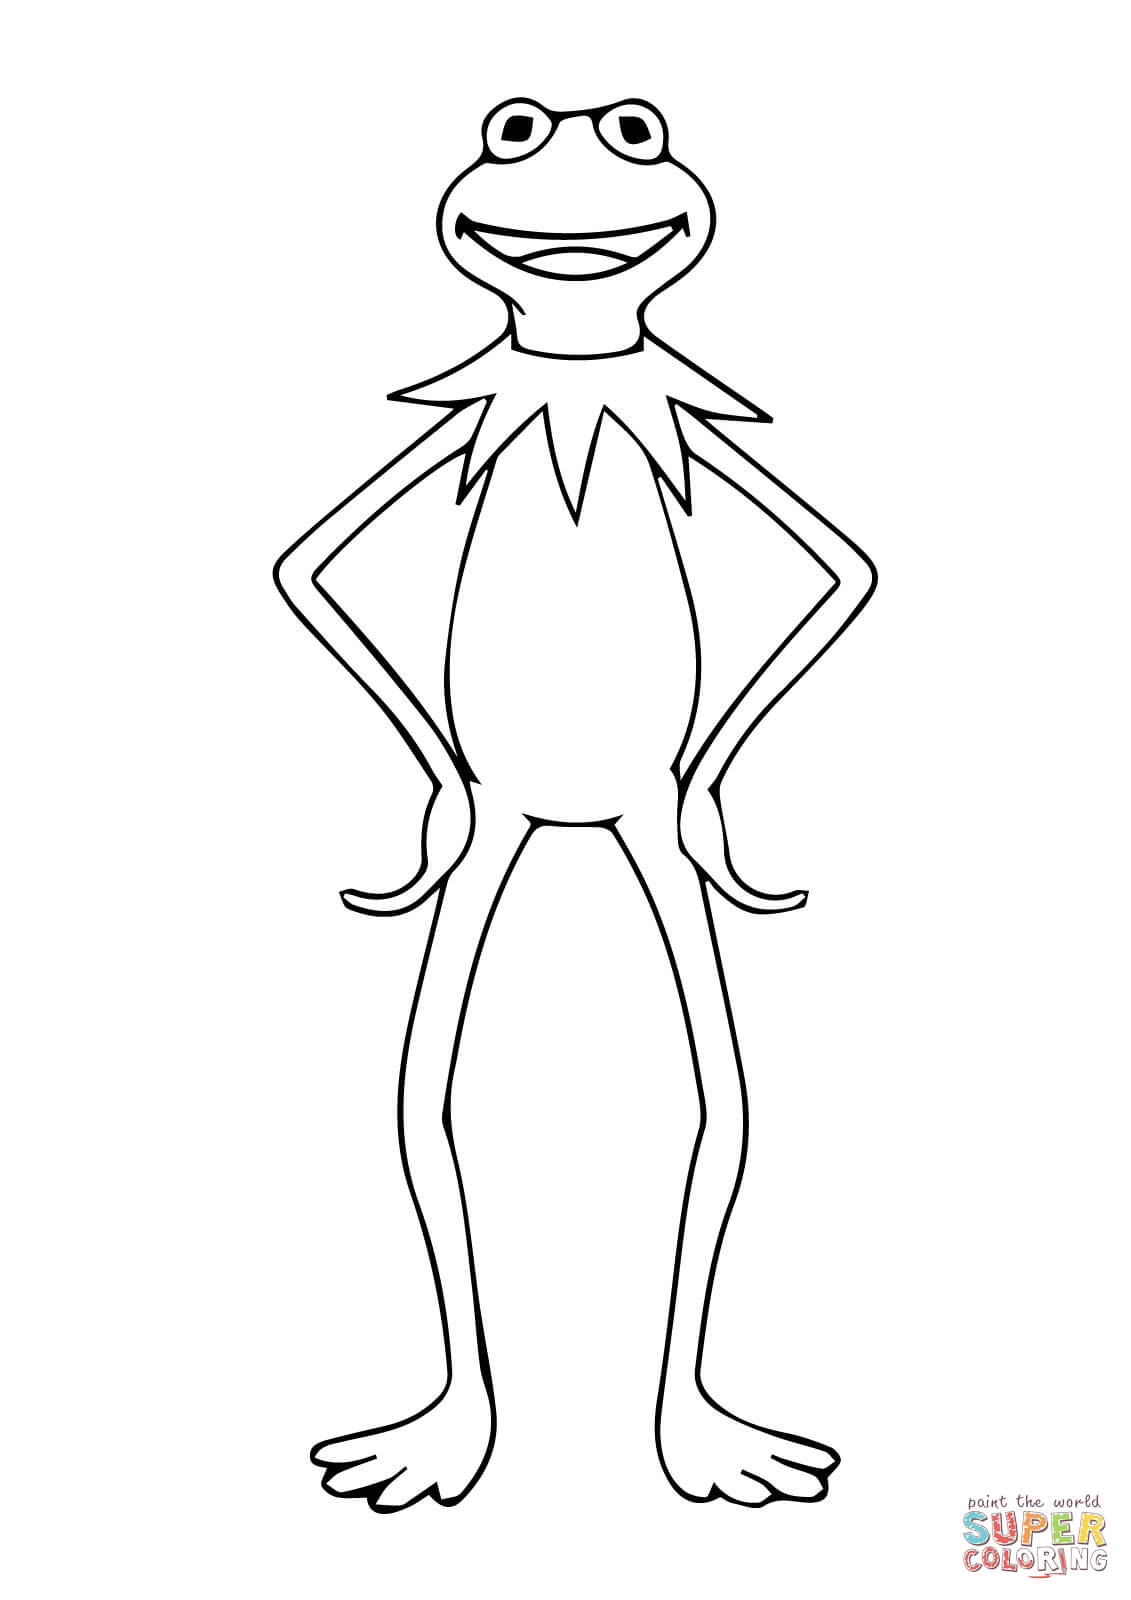 Kermit the frog is standing coloring page free printable coloring pages